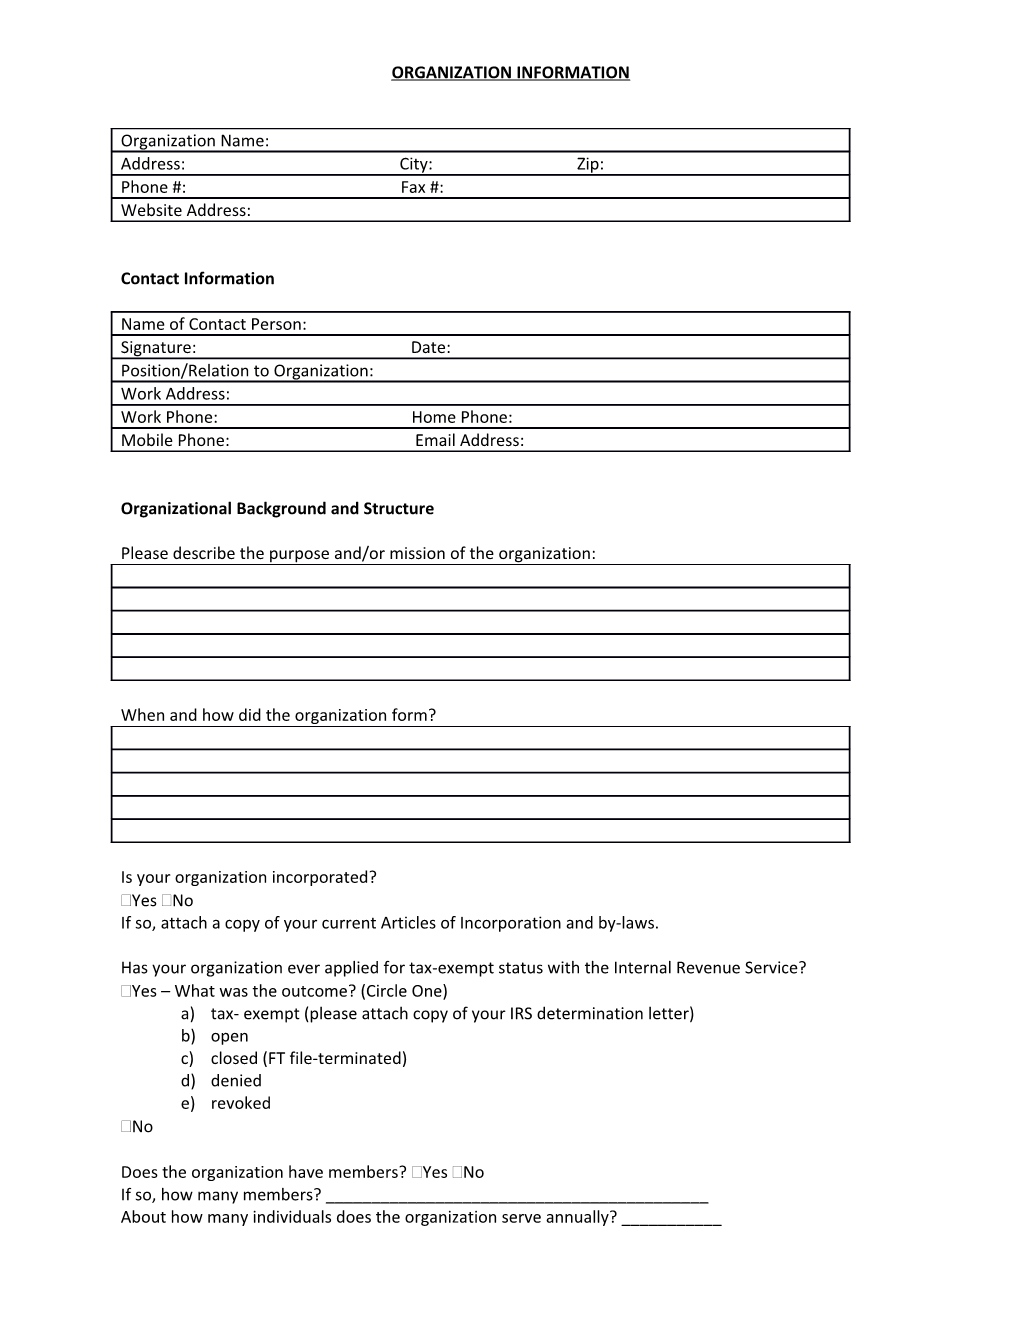 Request for Legal Assistance Form